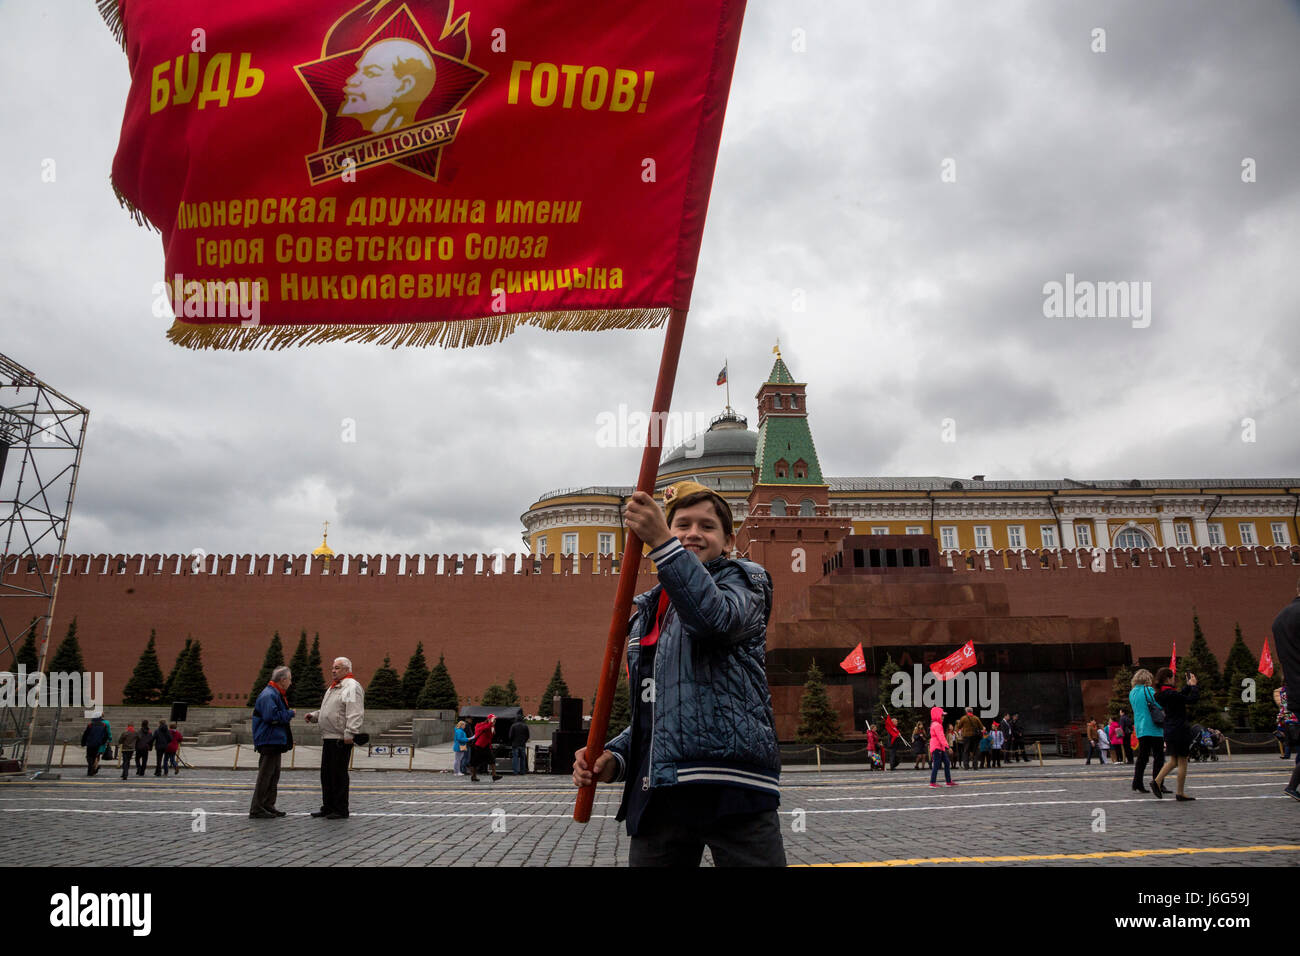 Moscow, Russia. 21st May, 2017. Children attend the official ceremony of tying red scarves around their necks, symbolizing their initiation into the Young Pioneer Youth communist group, created in the Soviet Union for children 10-14 years old, in Moscow's Red square on May 21, 2017. Some three thousands pioneers took part in the ceremony. Credit: Nikolay Vinokurov/Alamy Live News Credit: Nikolay Vinokurov/Alamy Live News Stock Photo